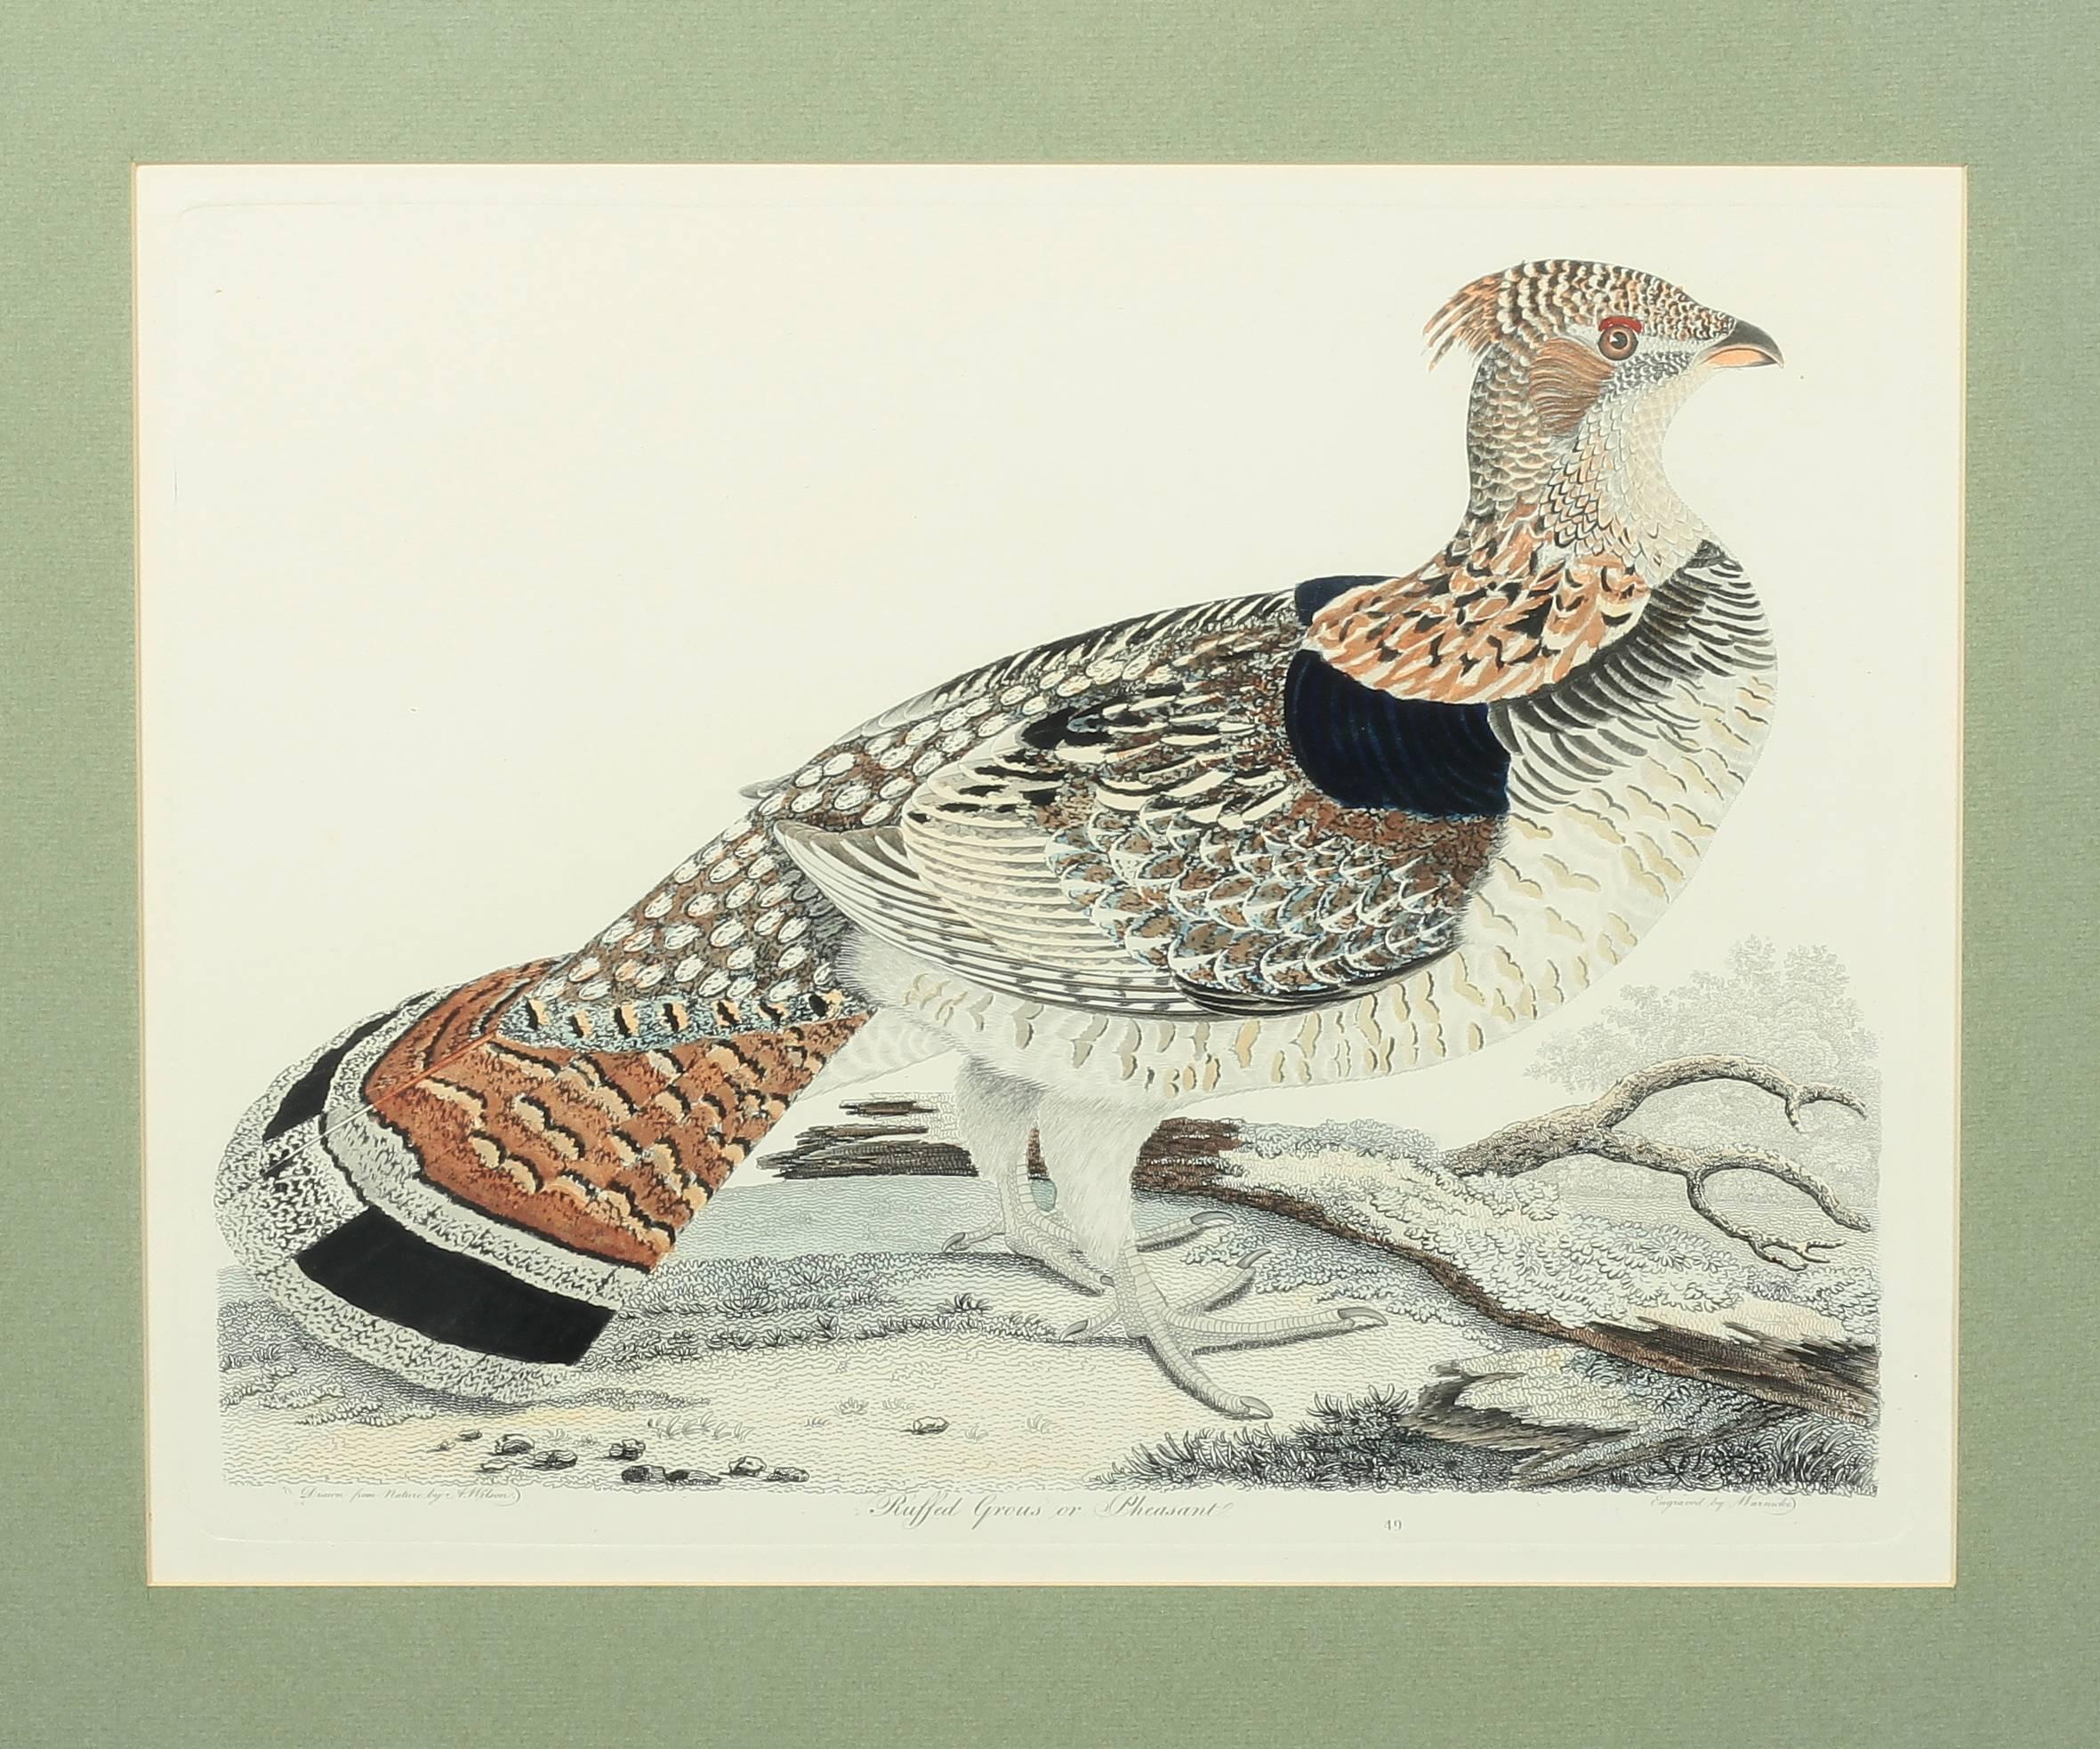 An original hand-colored engraving of a 'Ruffed Grouse or Pheasant' by artist Alexander Wilson (Warnicke printer). An American piece dated 1808, it is a first edition, plate number 49. The sight size measures 15 inches high by 11.5 inches wide and